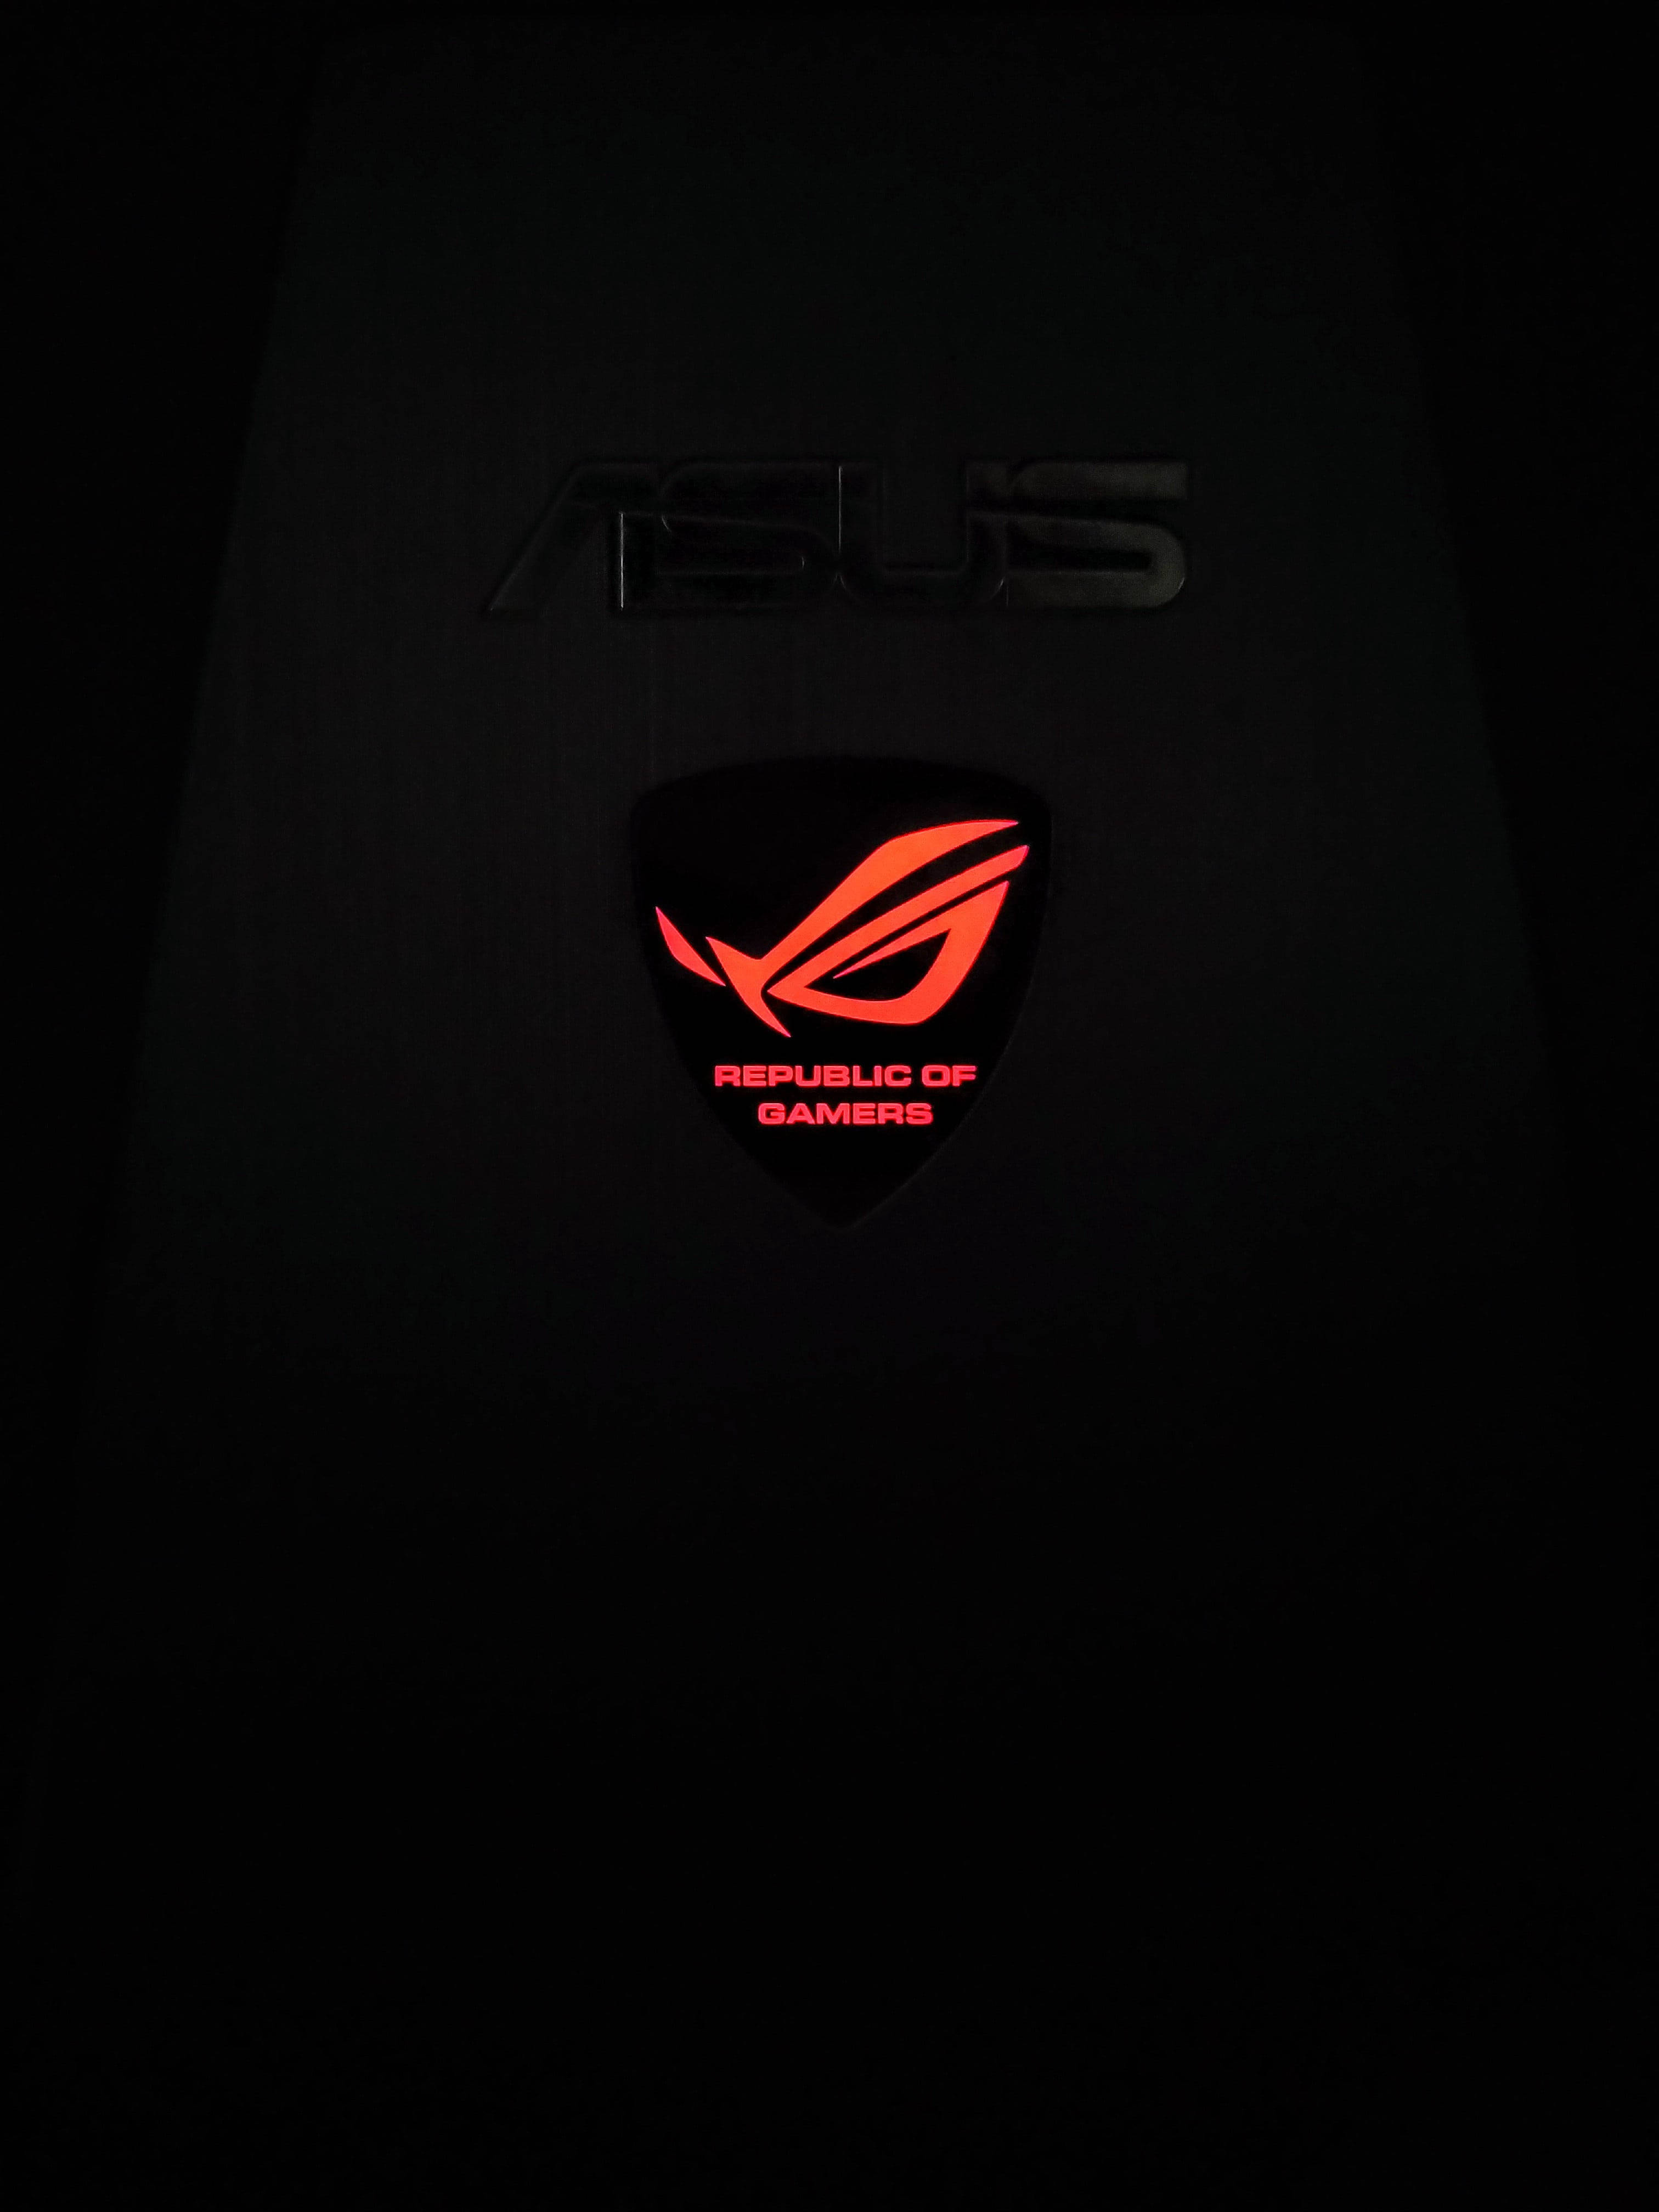 Free Rog Wallpaper Downloads, [100+] Rog Wallpapers for FREE | Wallpapers .com